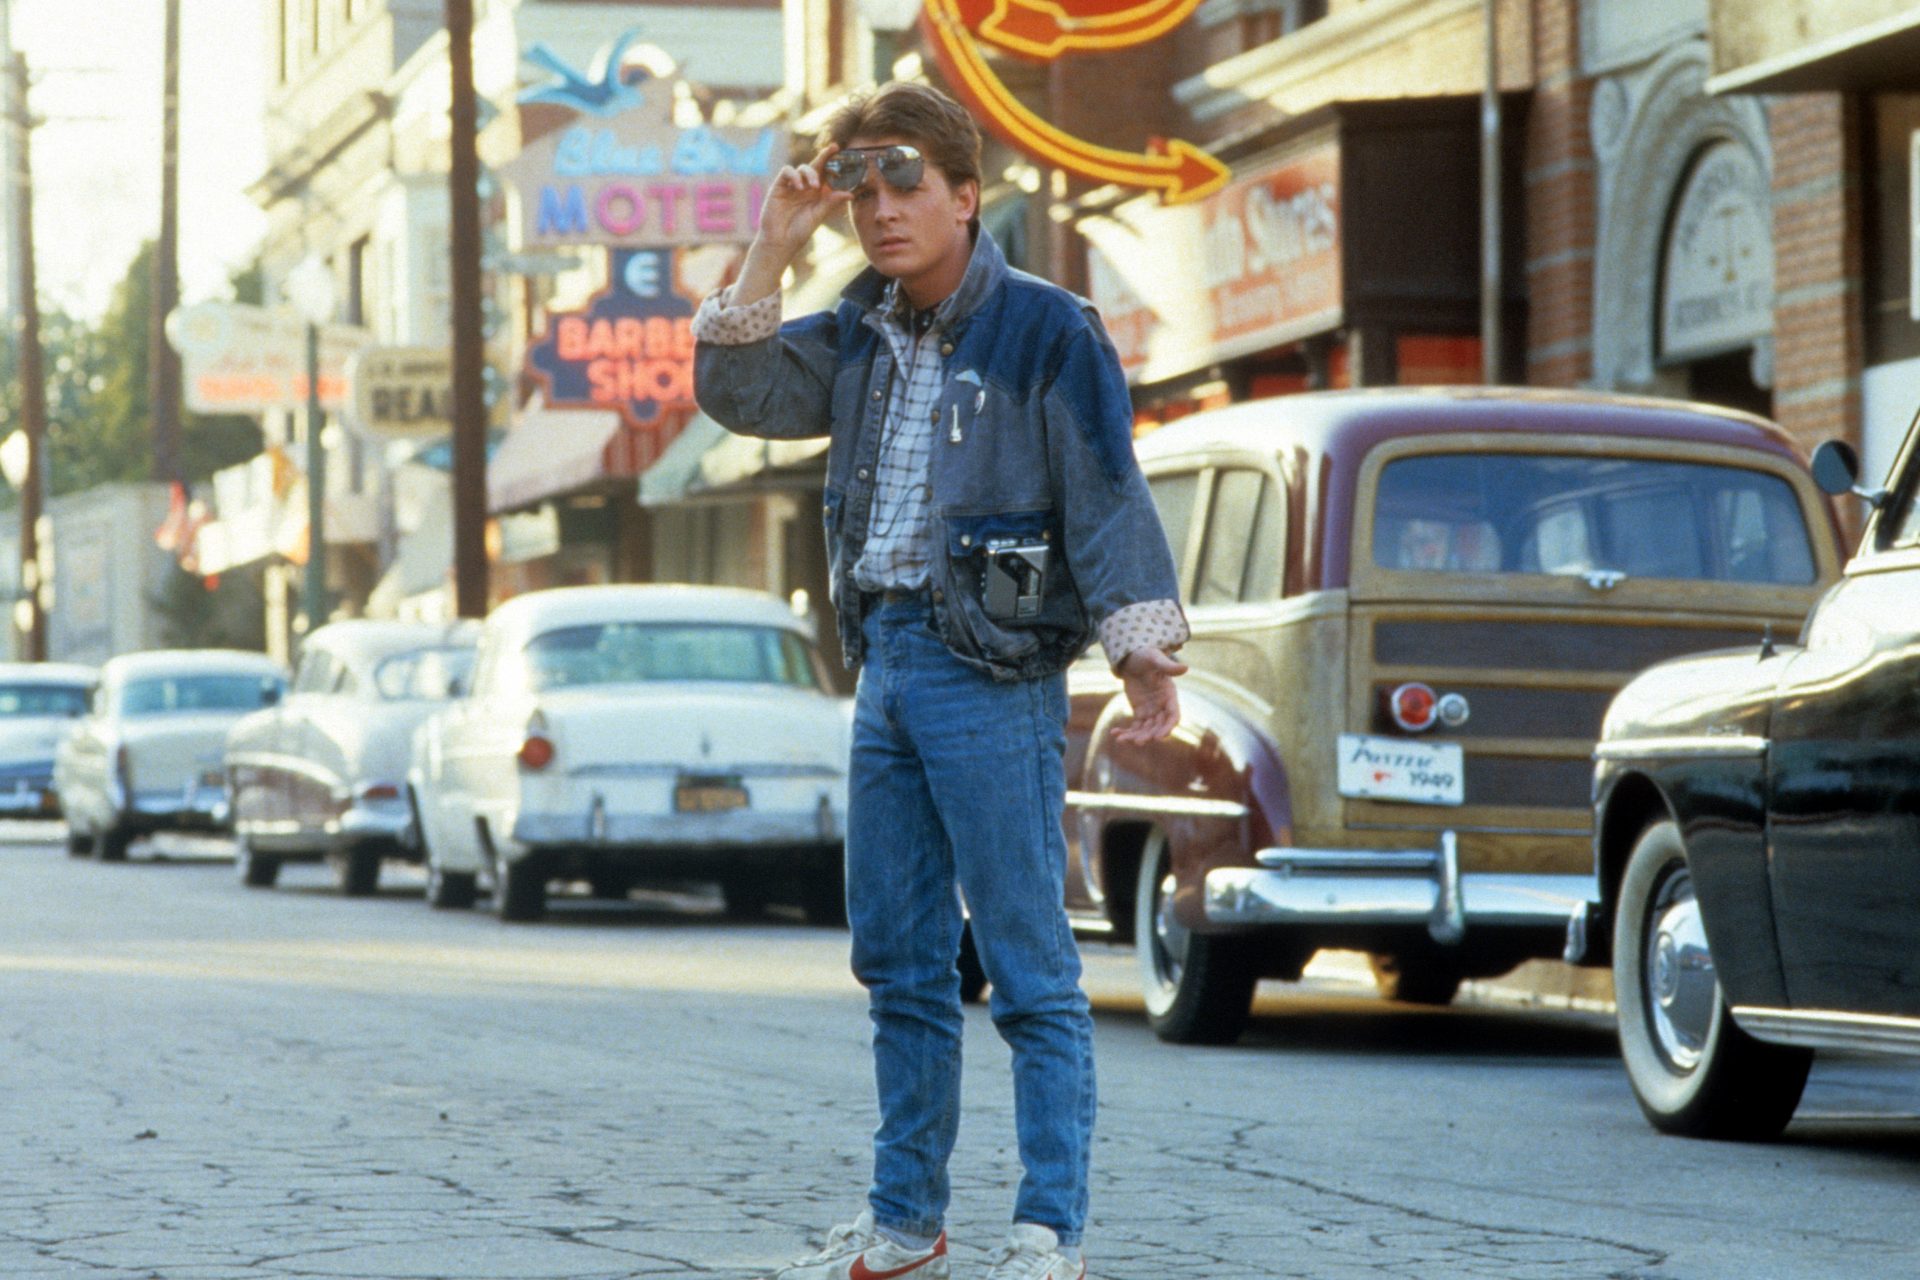 <p>Back to the Future - Perhaps the best time travel movie, this story became a classic trilogy. The first film is Hollywood history and was essential to the pop culture of the 80s. Marty McFly, Doc Brown, and the Delorean stood at the head.</p>